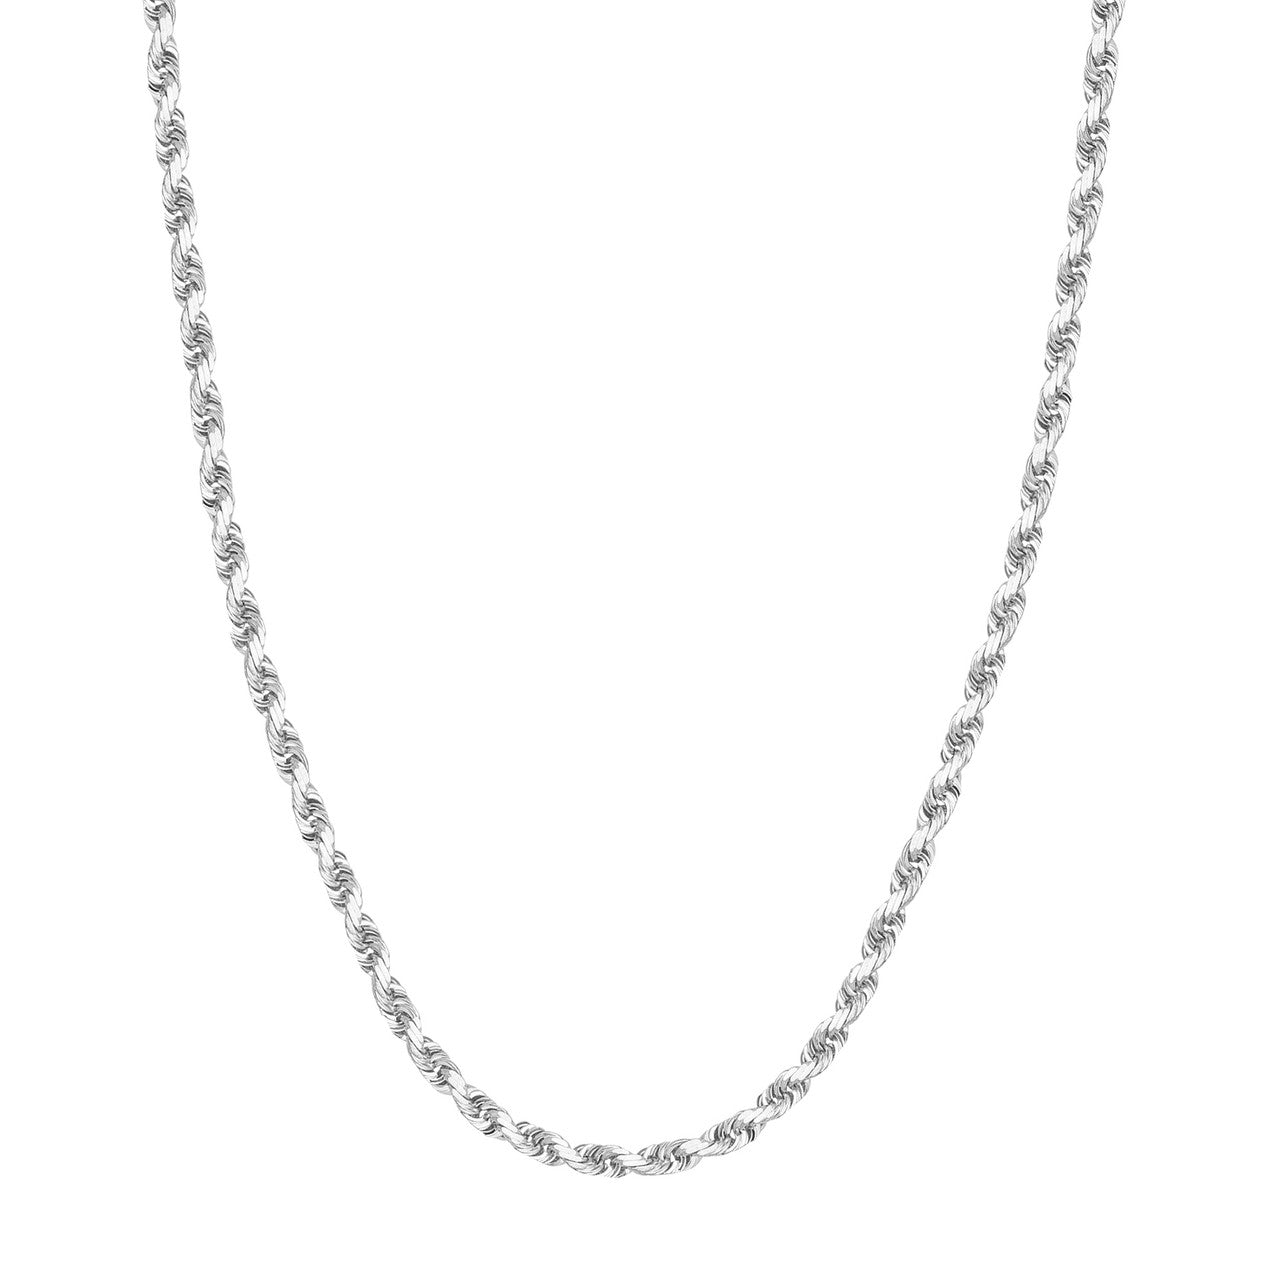 14K White Gold 4.50mm Solid Diamond Cut Rope Chain with Lobster Lock